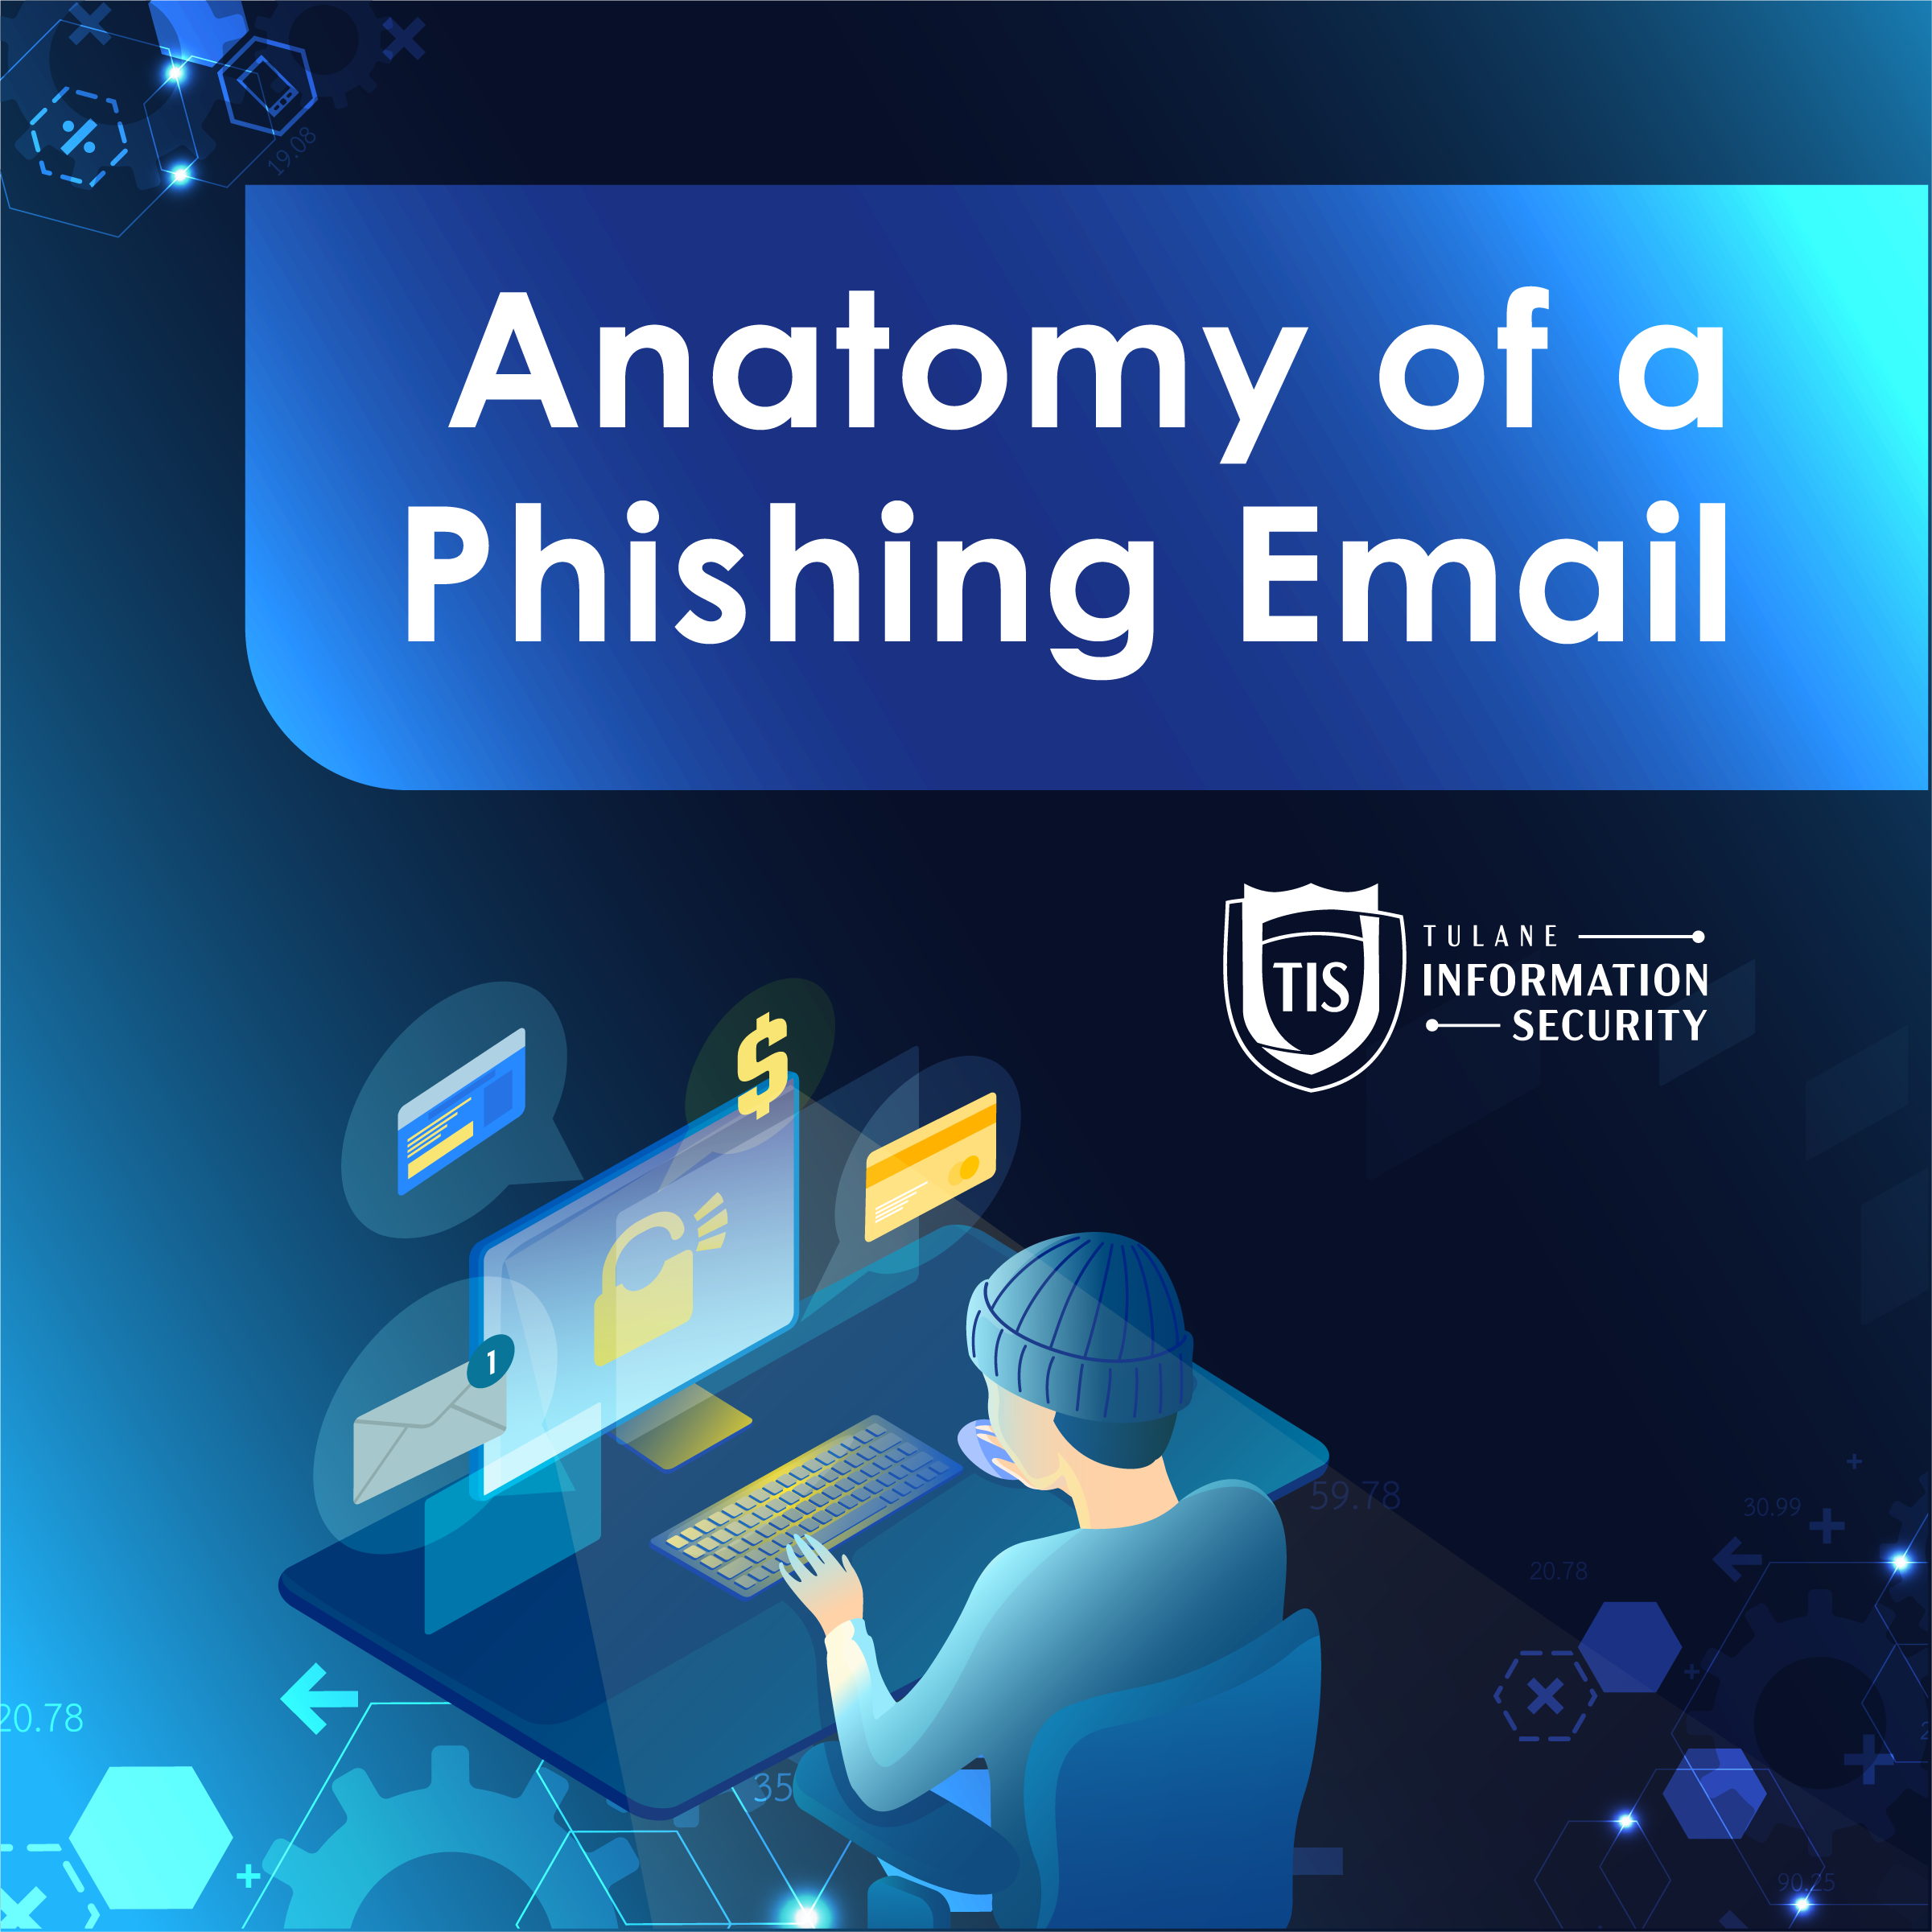 Anatomy of a Phishing Email